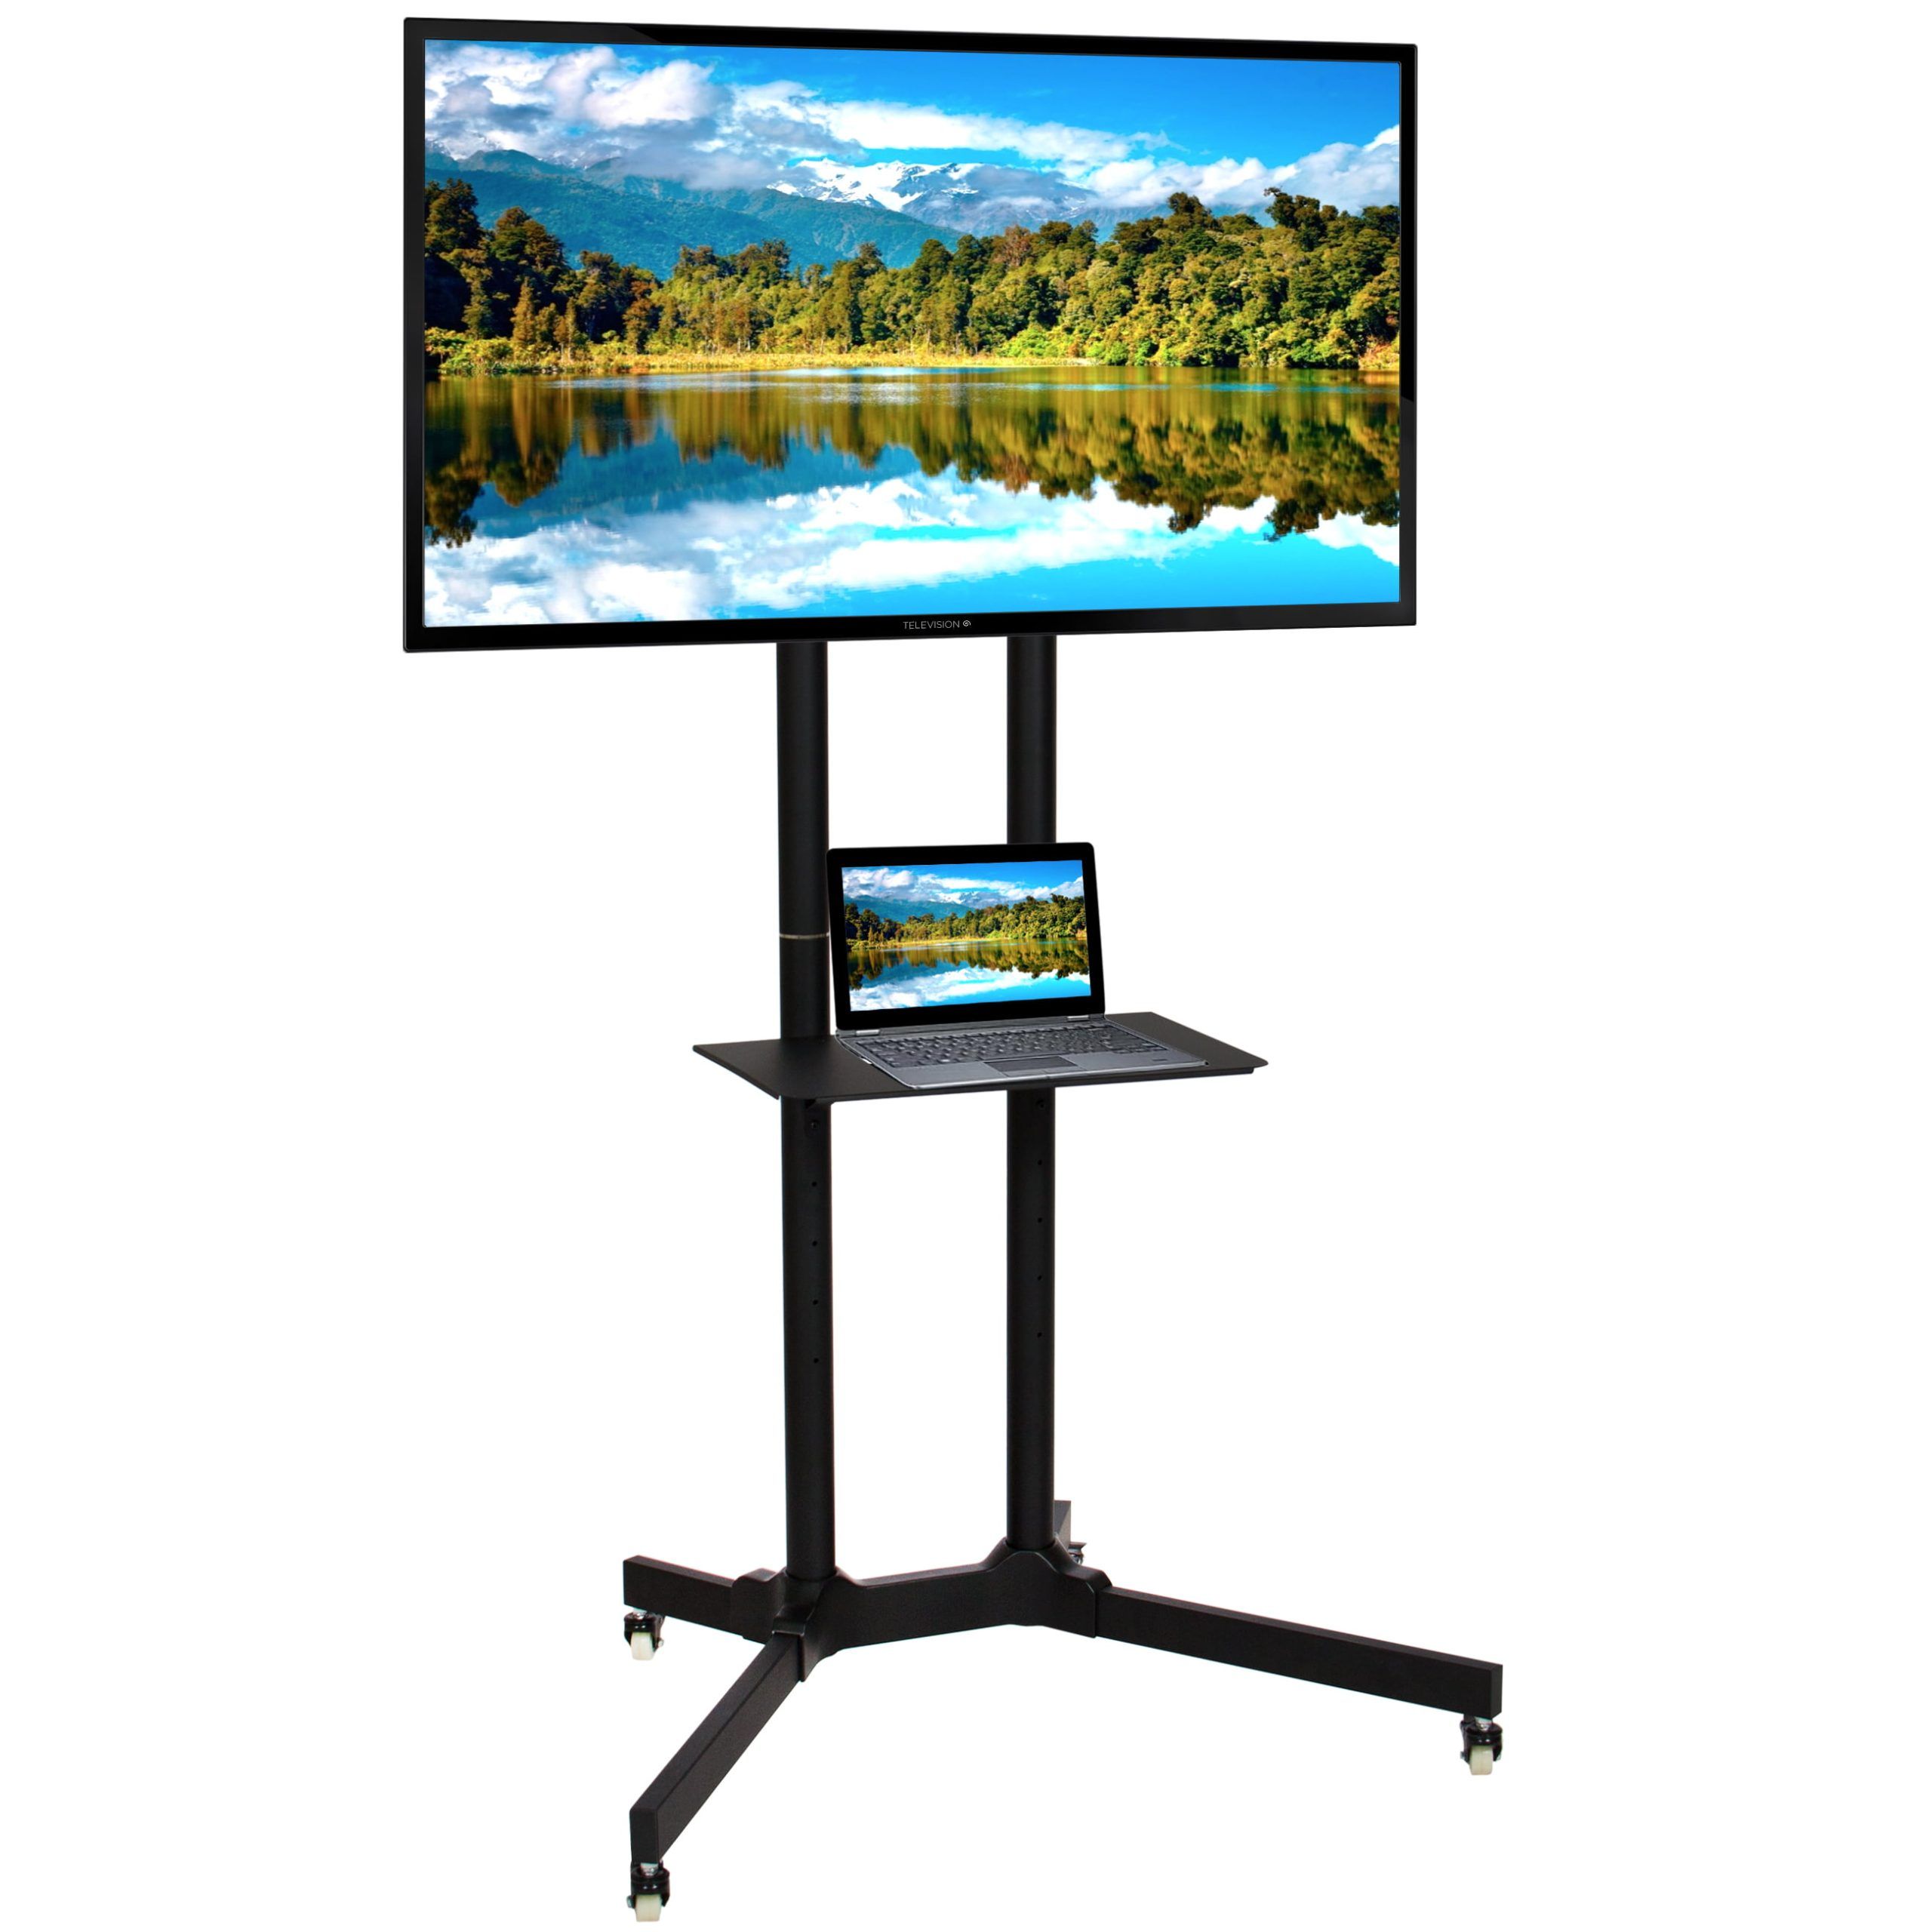 Best Choice Products Flat Panel Steel Mobile Tv Media Stand For 32 65in Throughout Stand For Flat Screen (Gallery 2 of 20)